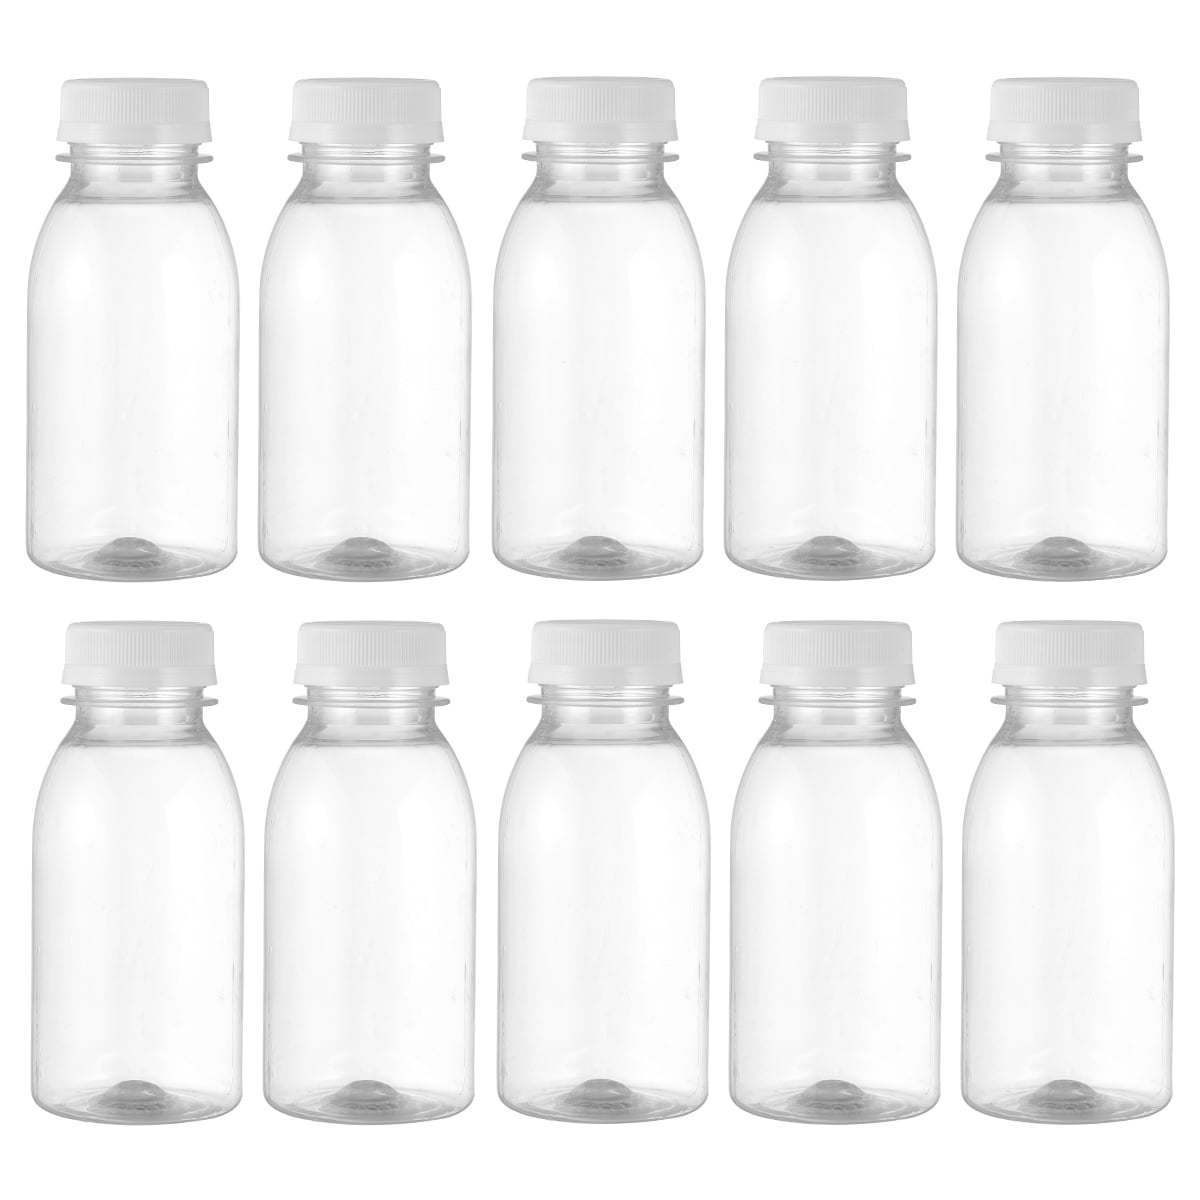 4 Ounce Mini Bottles for Mini Fridge, Reusable Juice Containers with White  Caps, Small Bottle for Li…See more 4 Ounce Mini Bottles for Mini Fridge